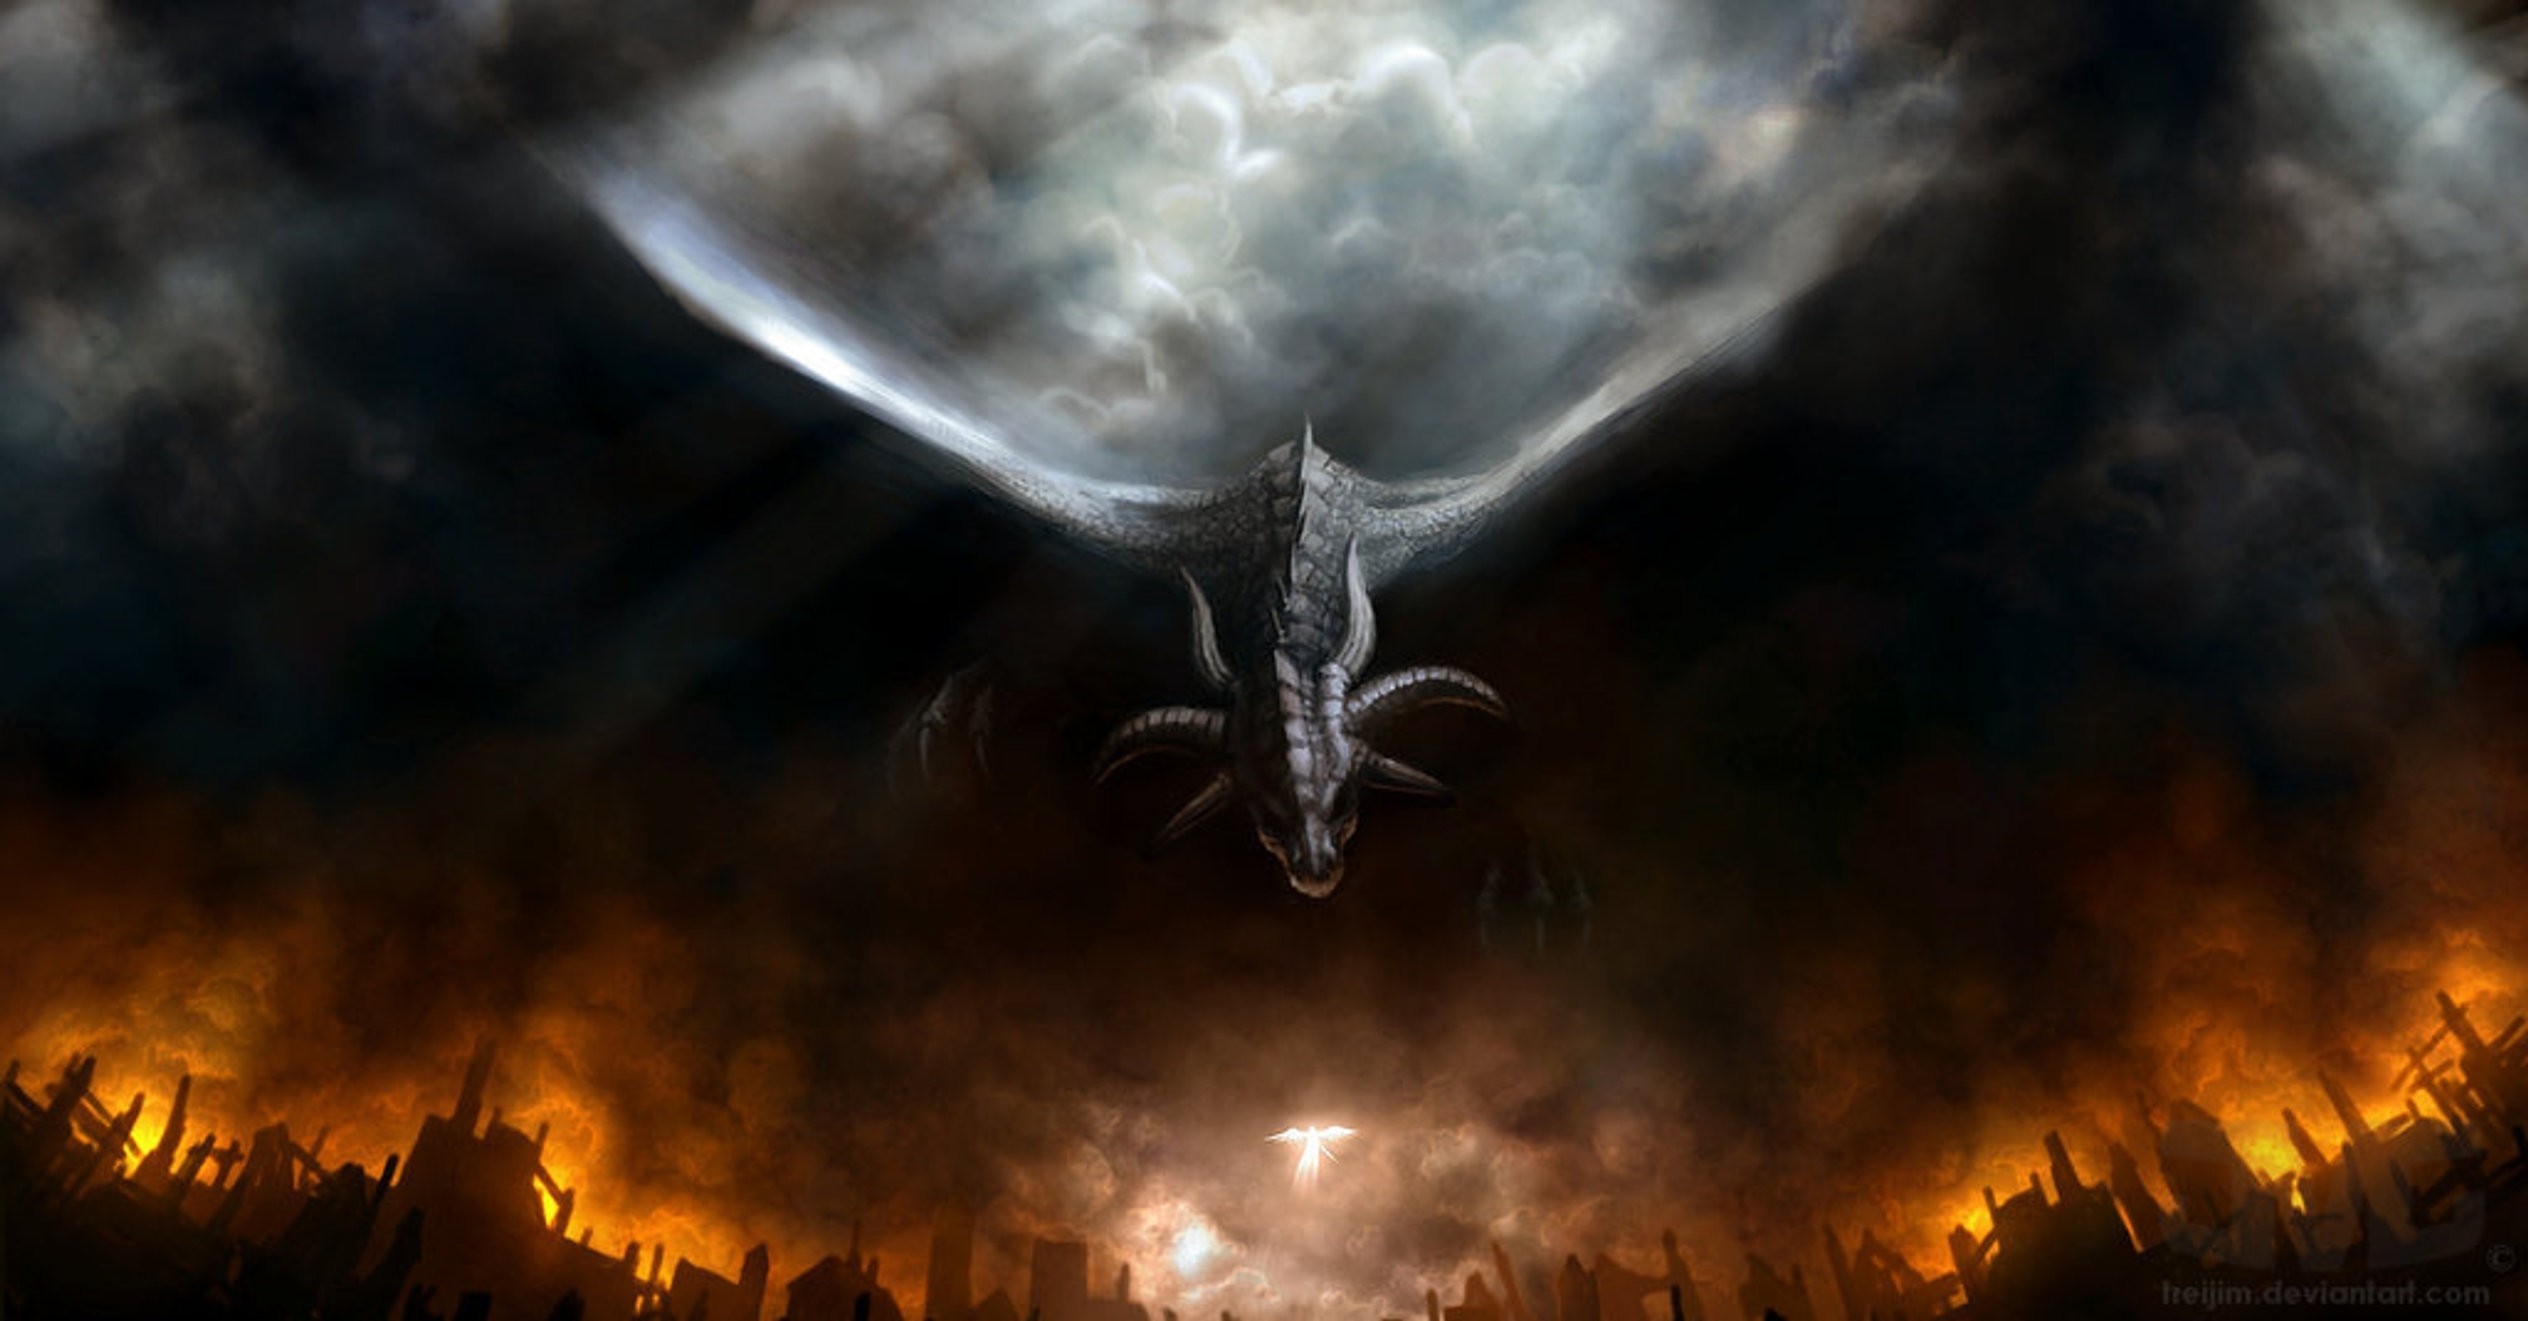 2528x1321 The soul - Dragon images , dragon pictures, dragon gallery